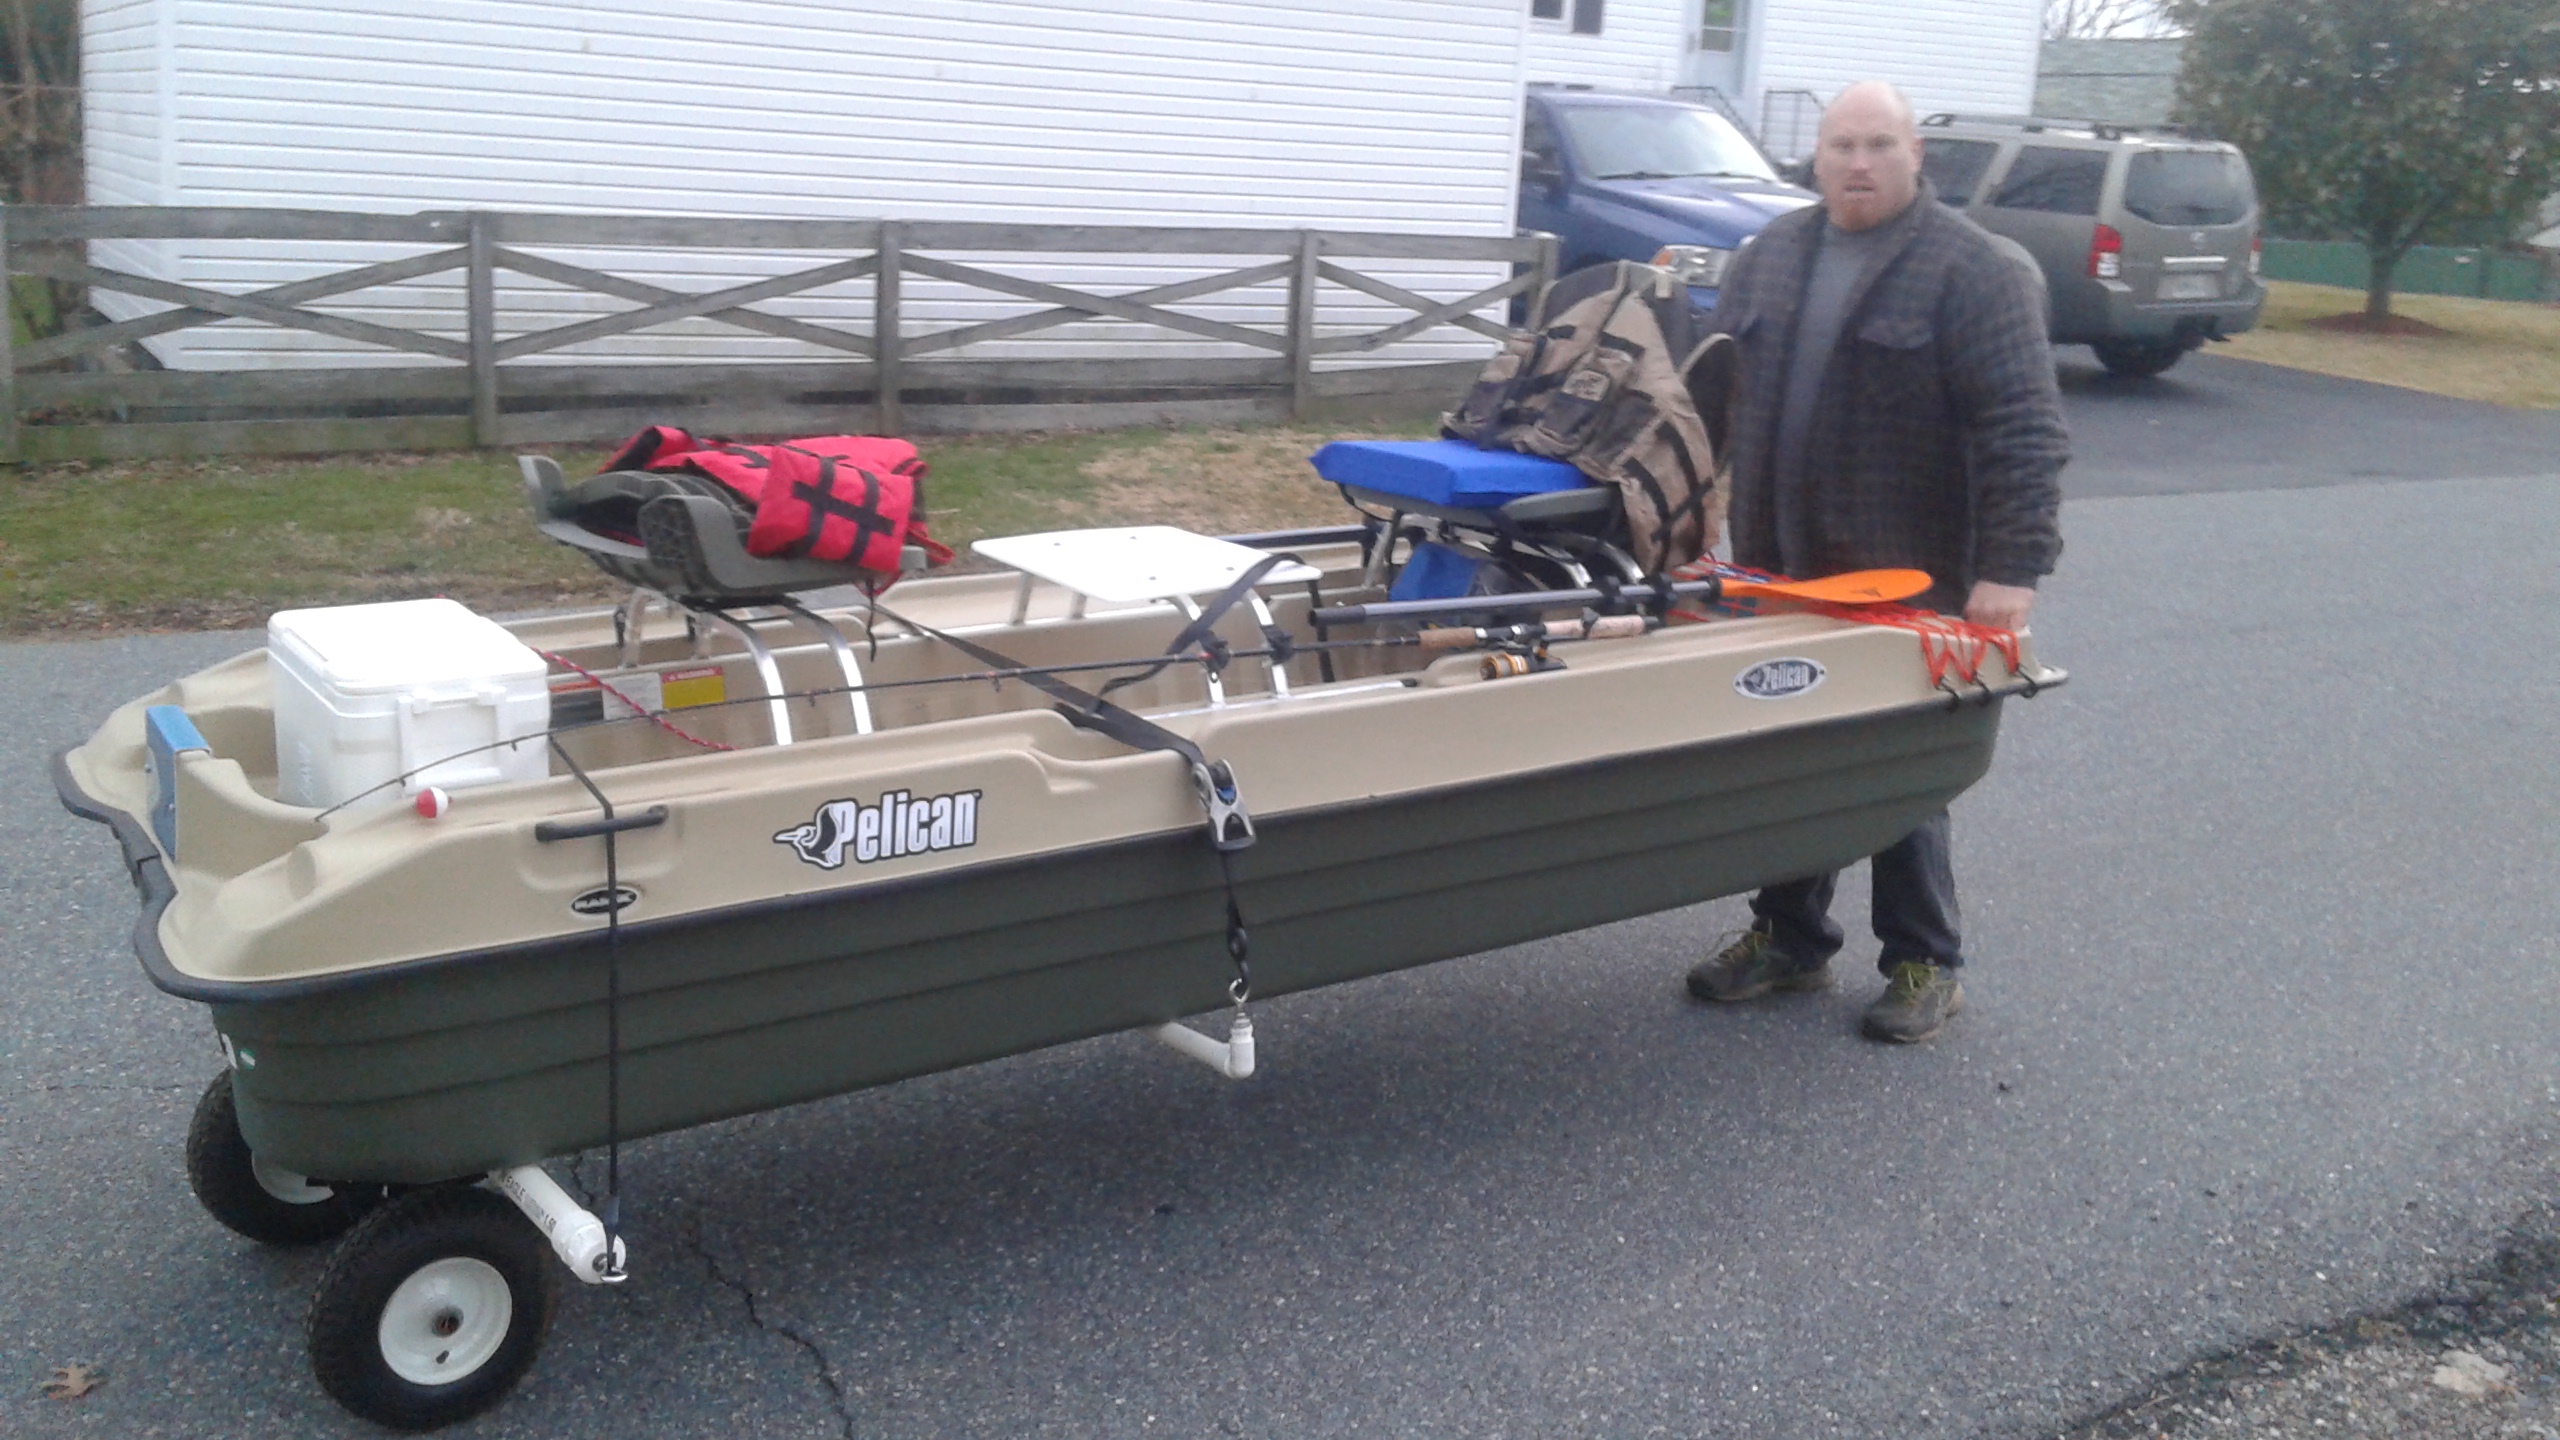 Any Pelican Bass Raider Owners Out There? - Page 83 - Bass Boats, Canoes,  Kayaks and more - Bass Fishing Forums